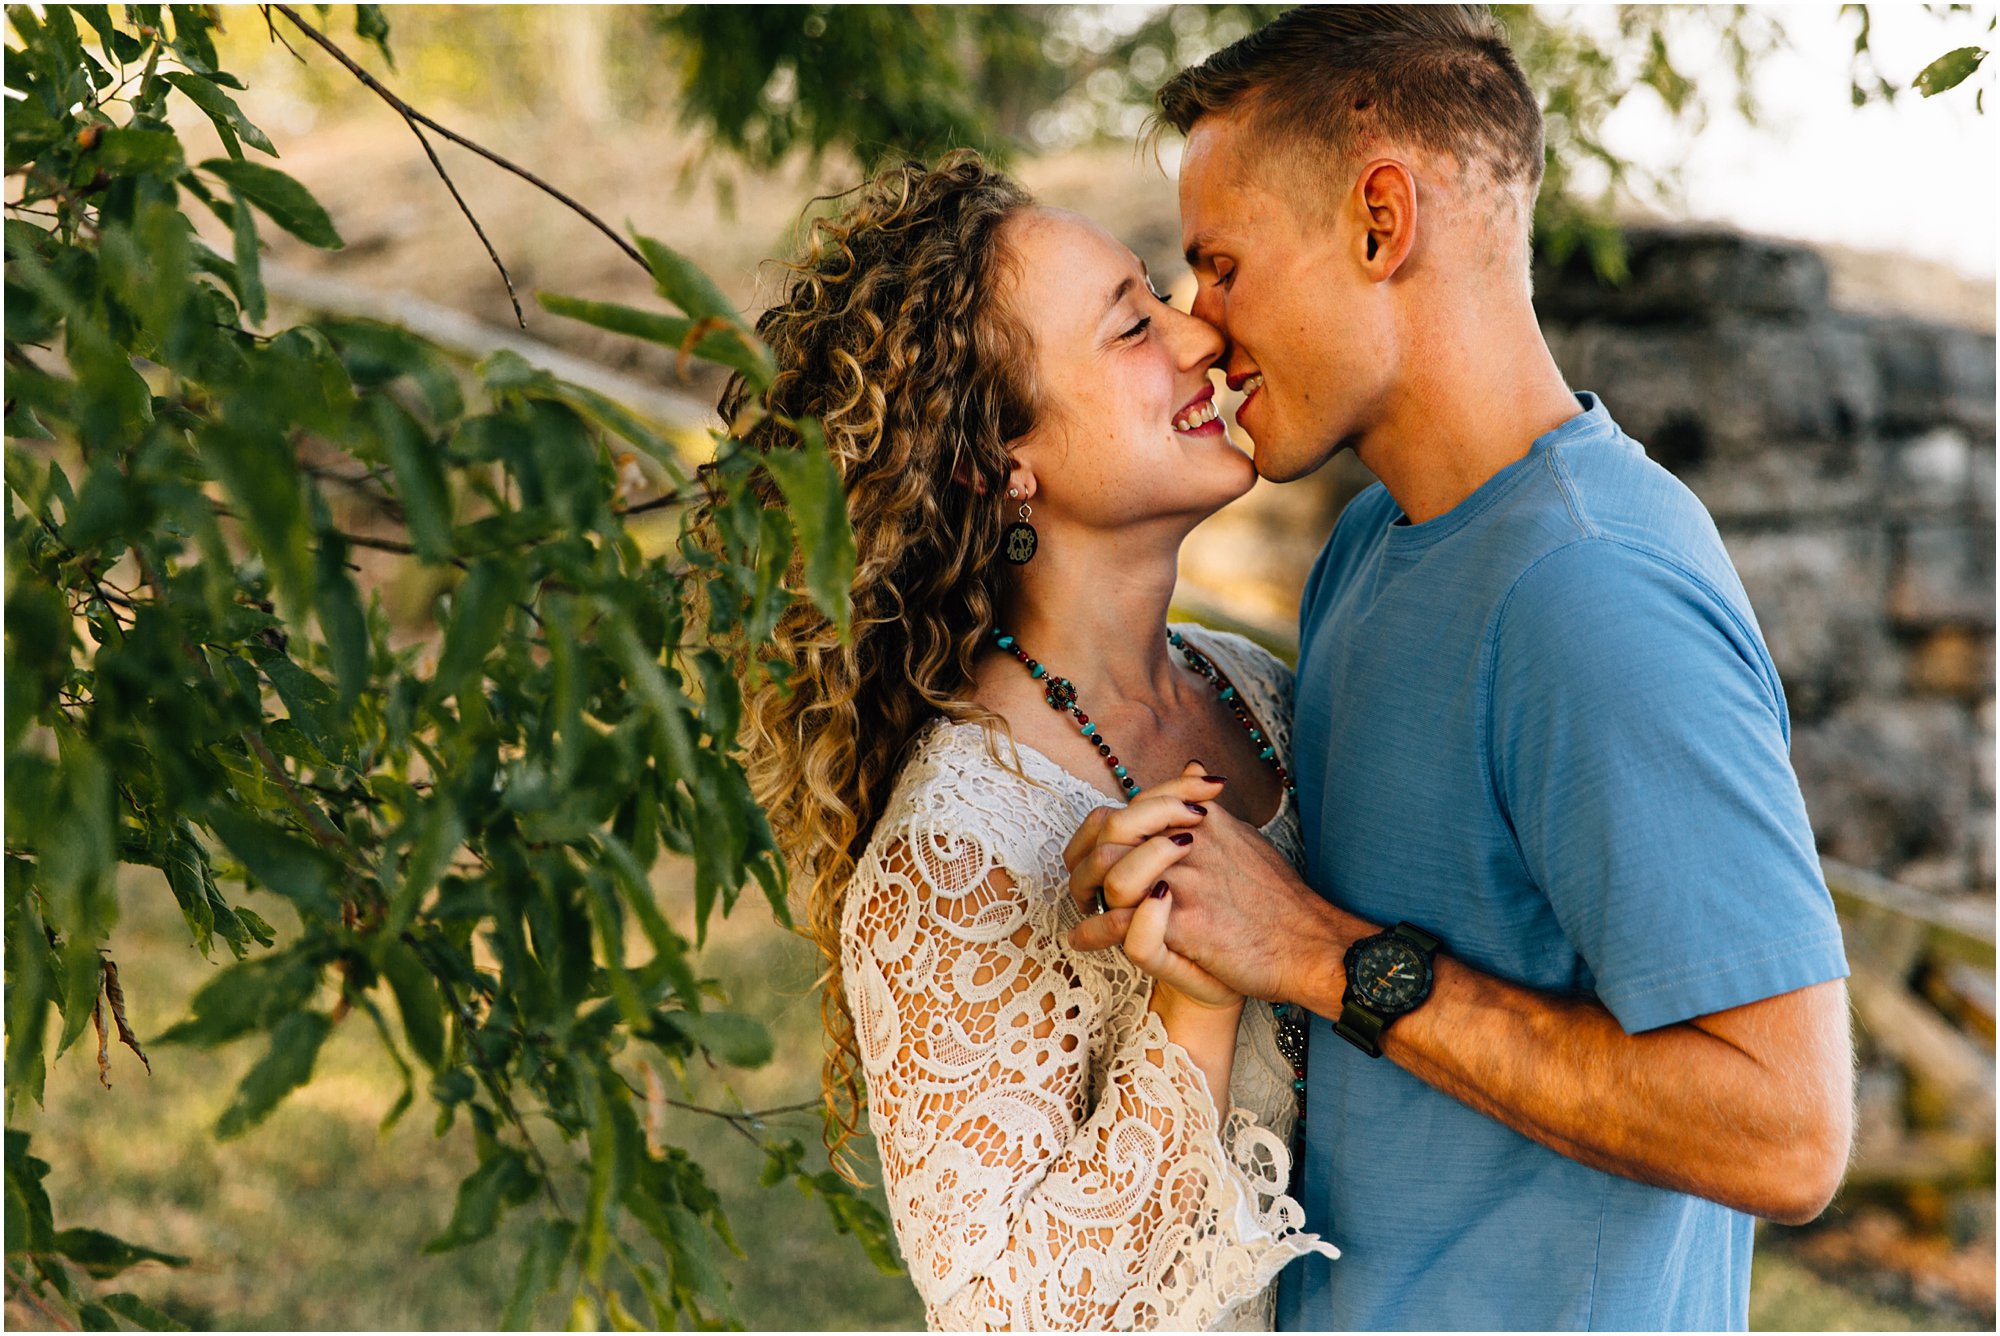 Nashville, TN engagement session with couple going in for a kiss under tree